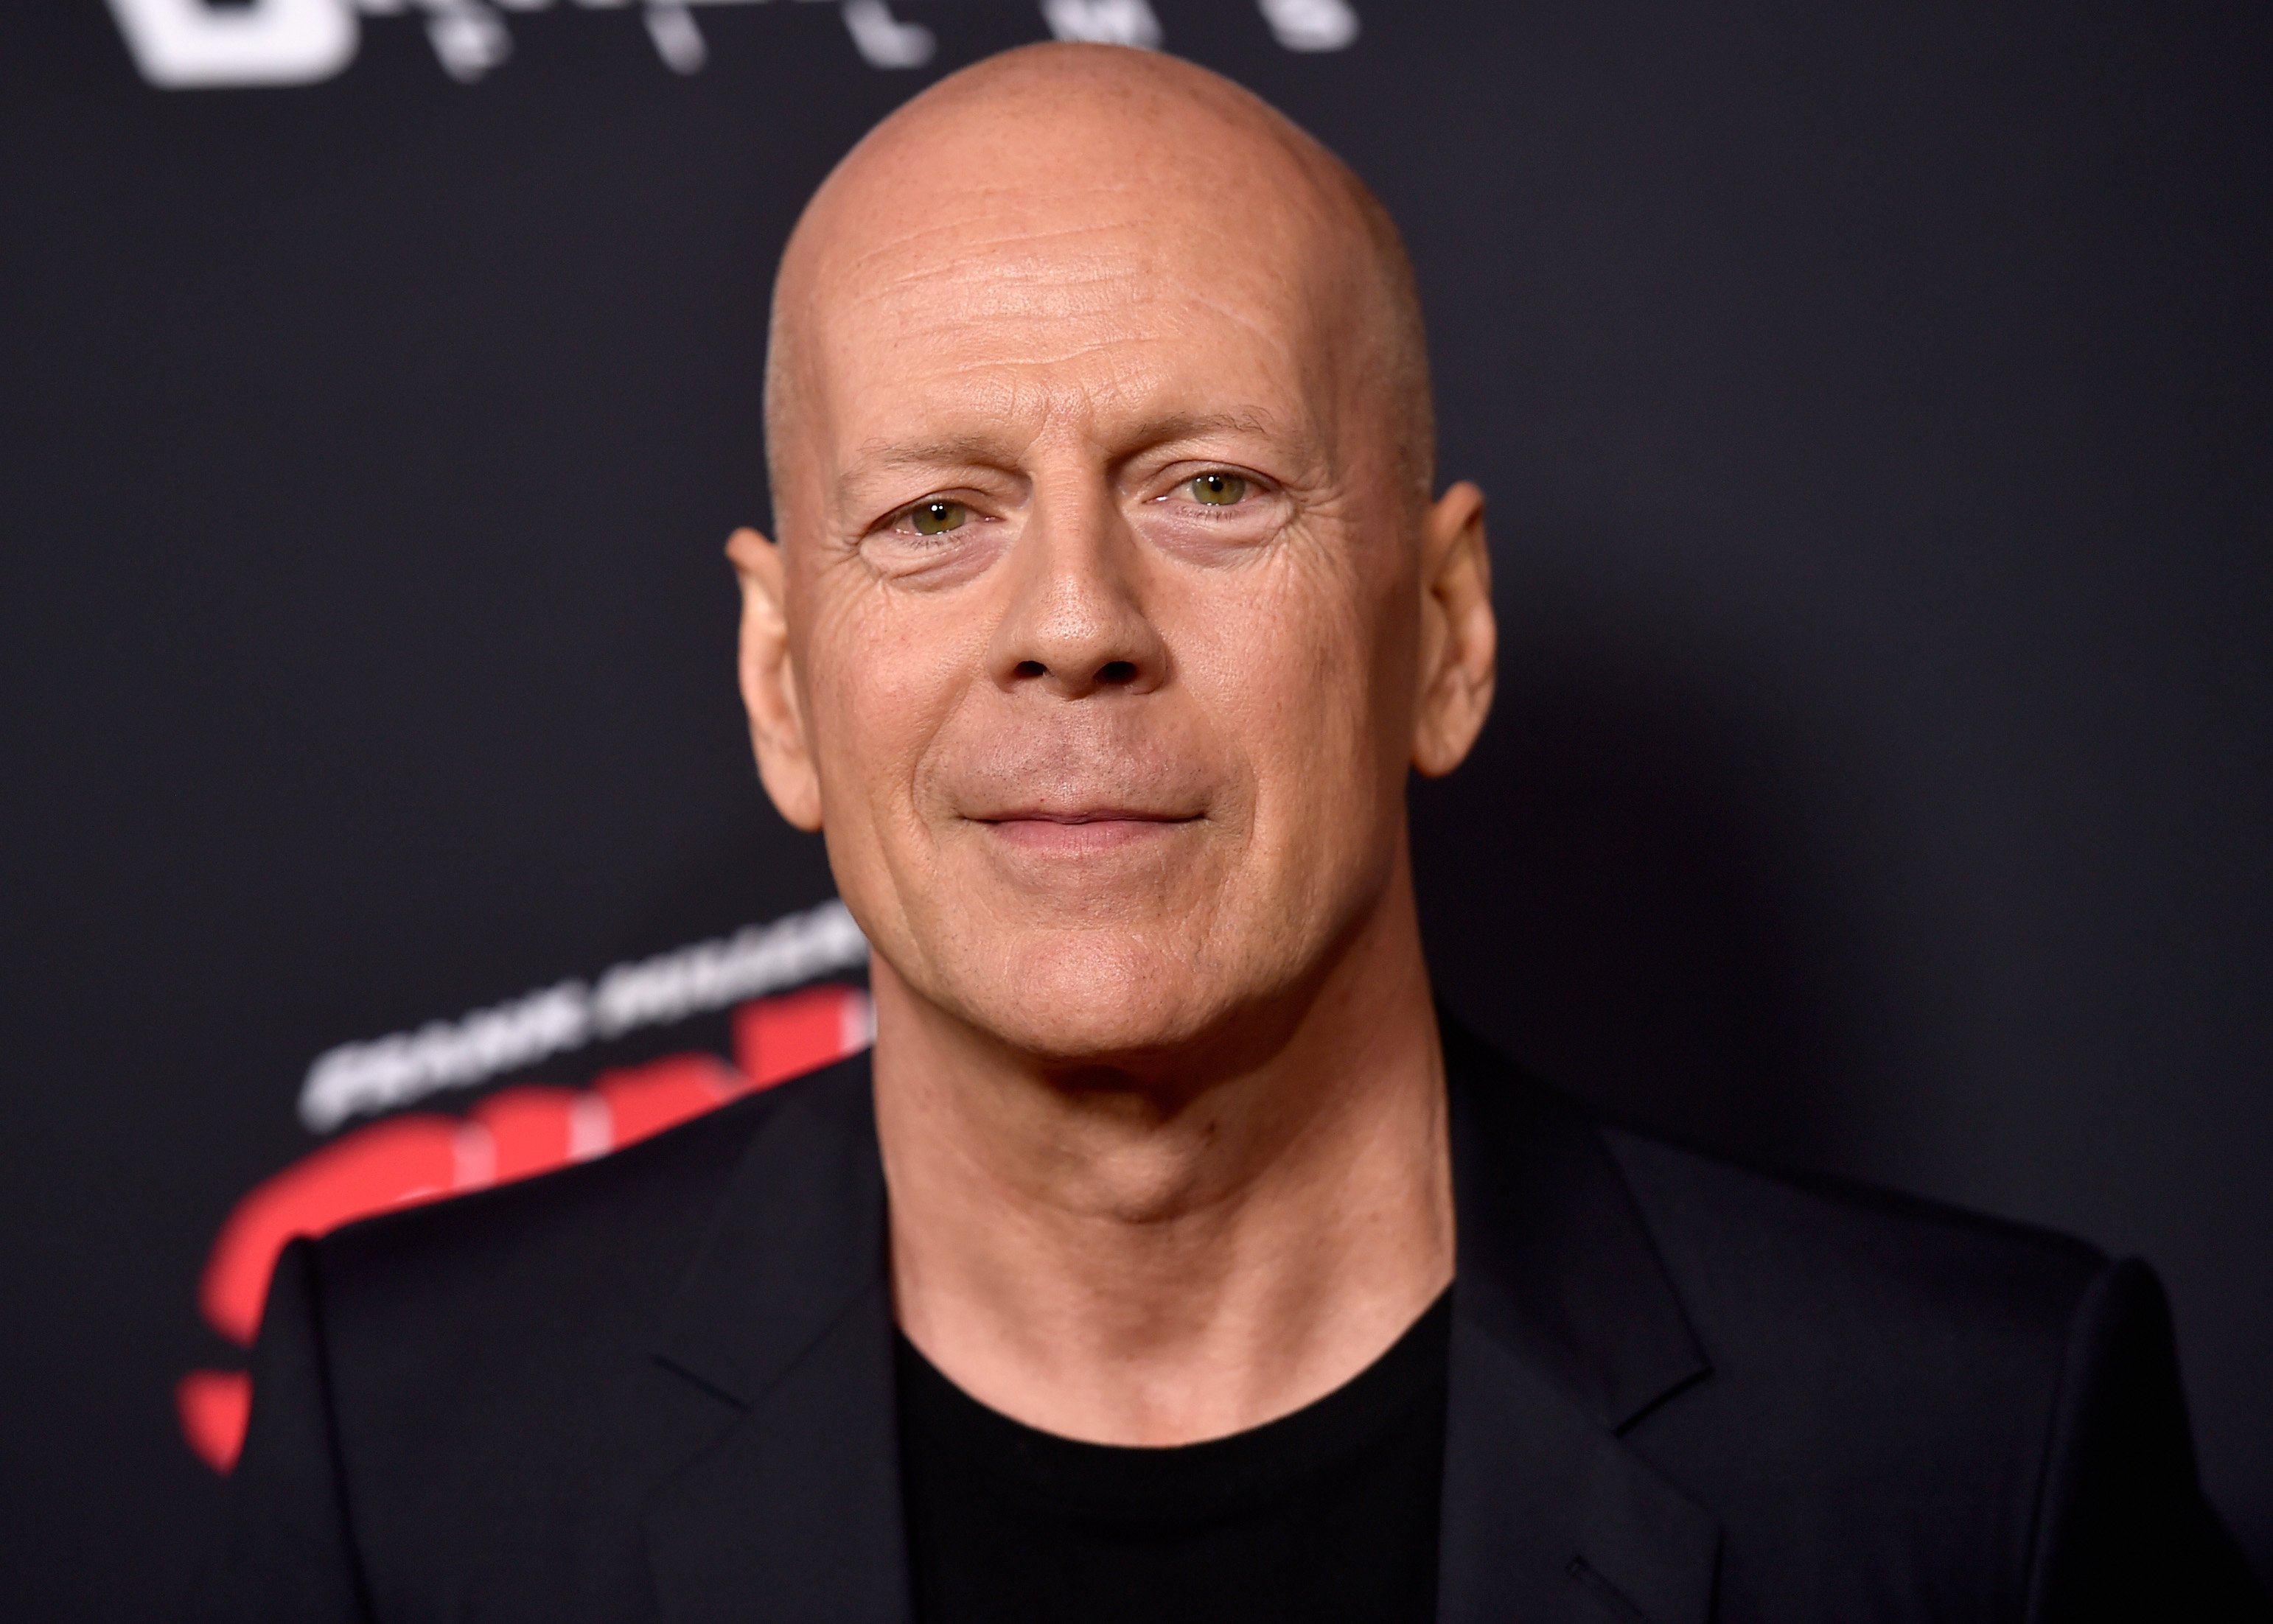 Bruce Willis poses in front of a black background during a media event. 